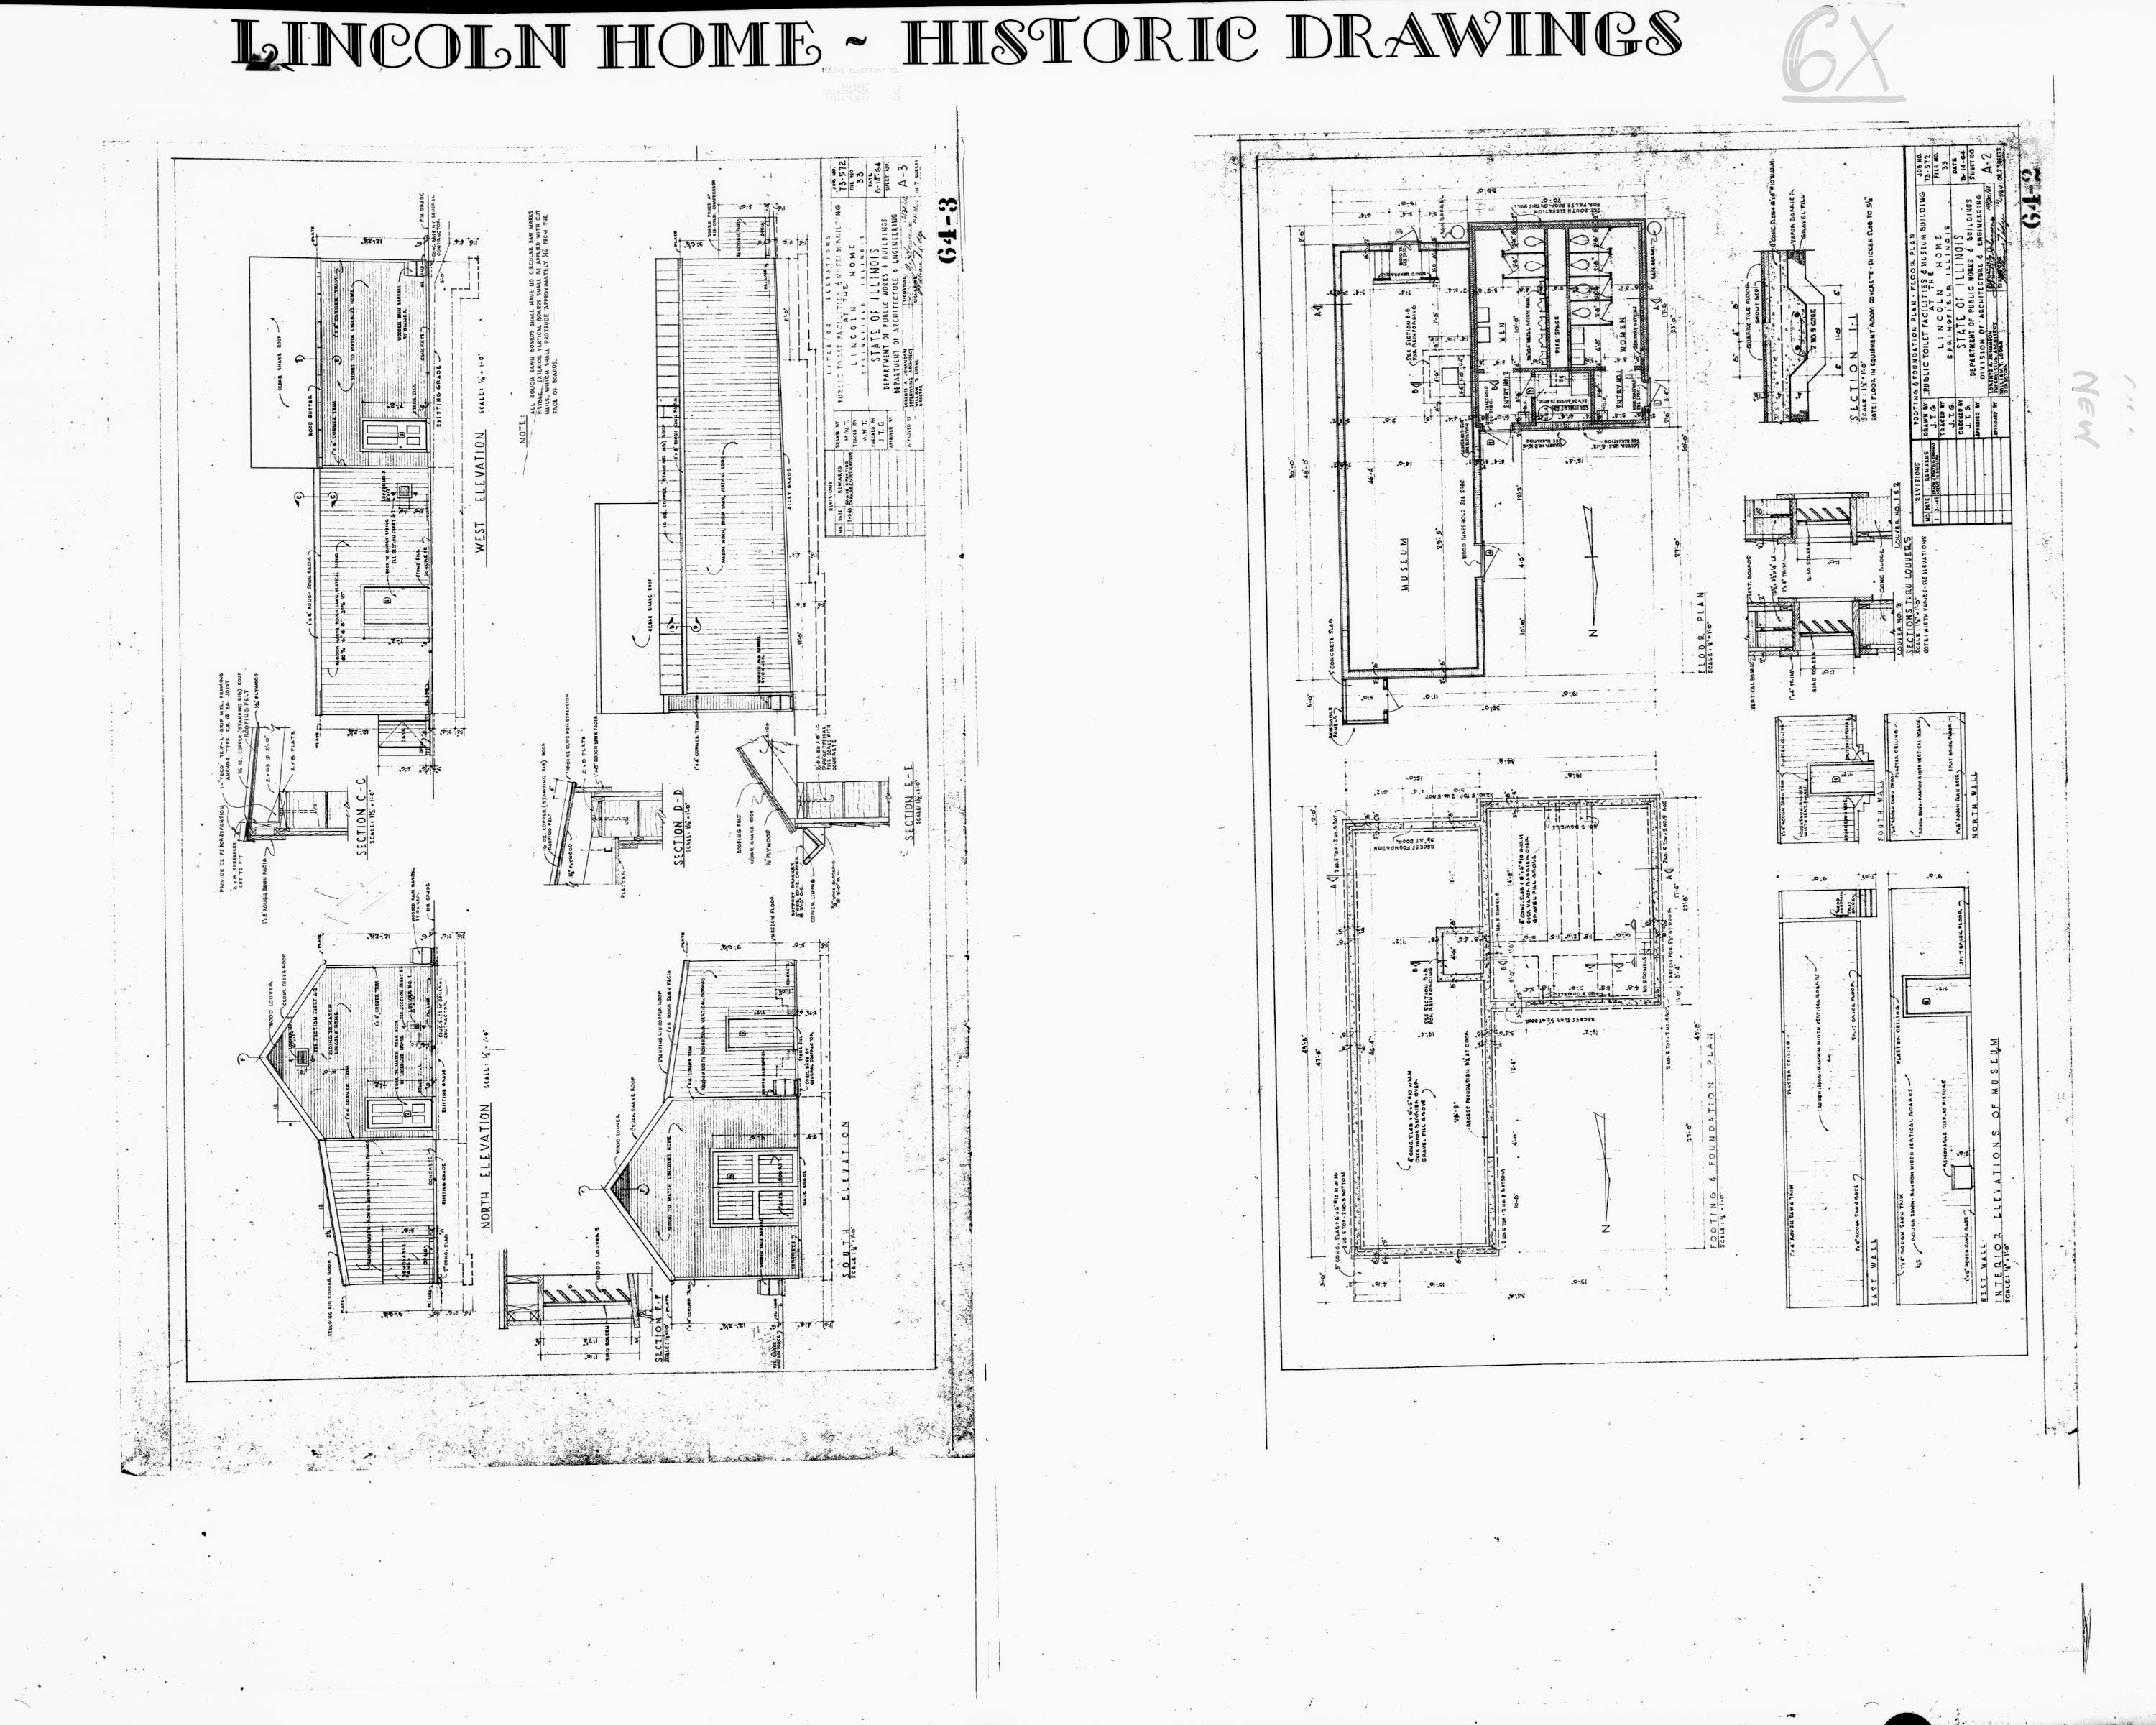 Lincoln Home - Historic Drawings  44 Lincoln, home, historic drawings, public toilet & museum facility, exterior elevations, footing, foundation, floor plan